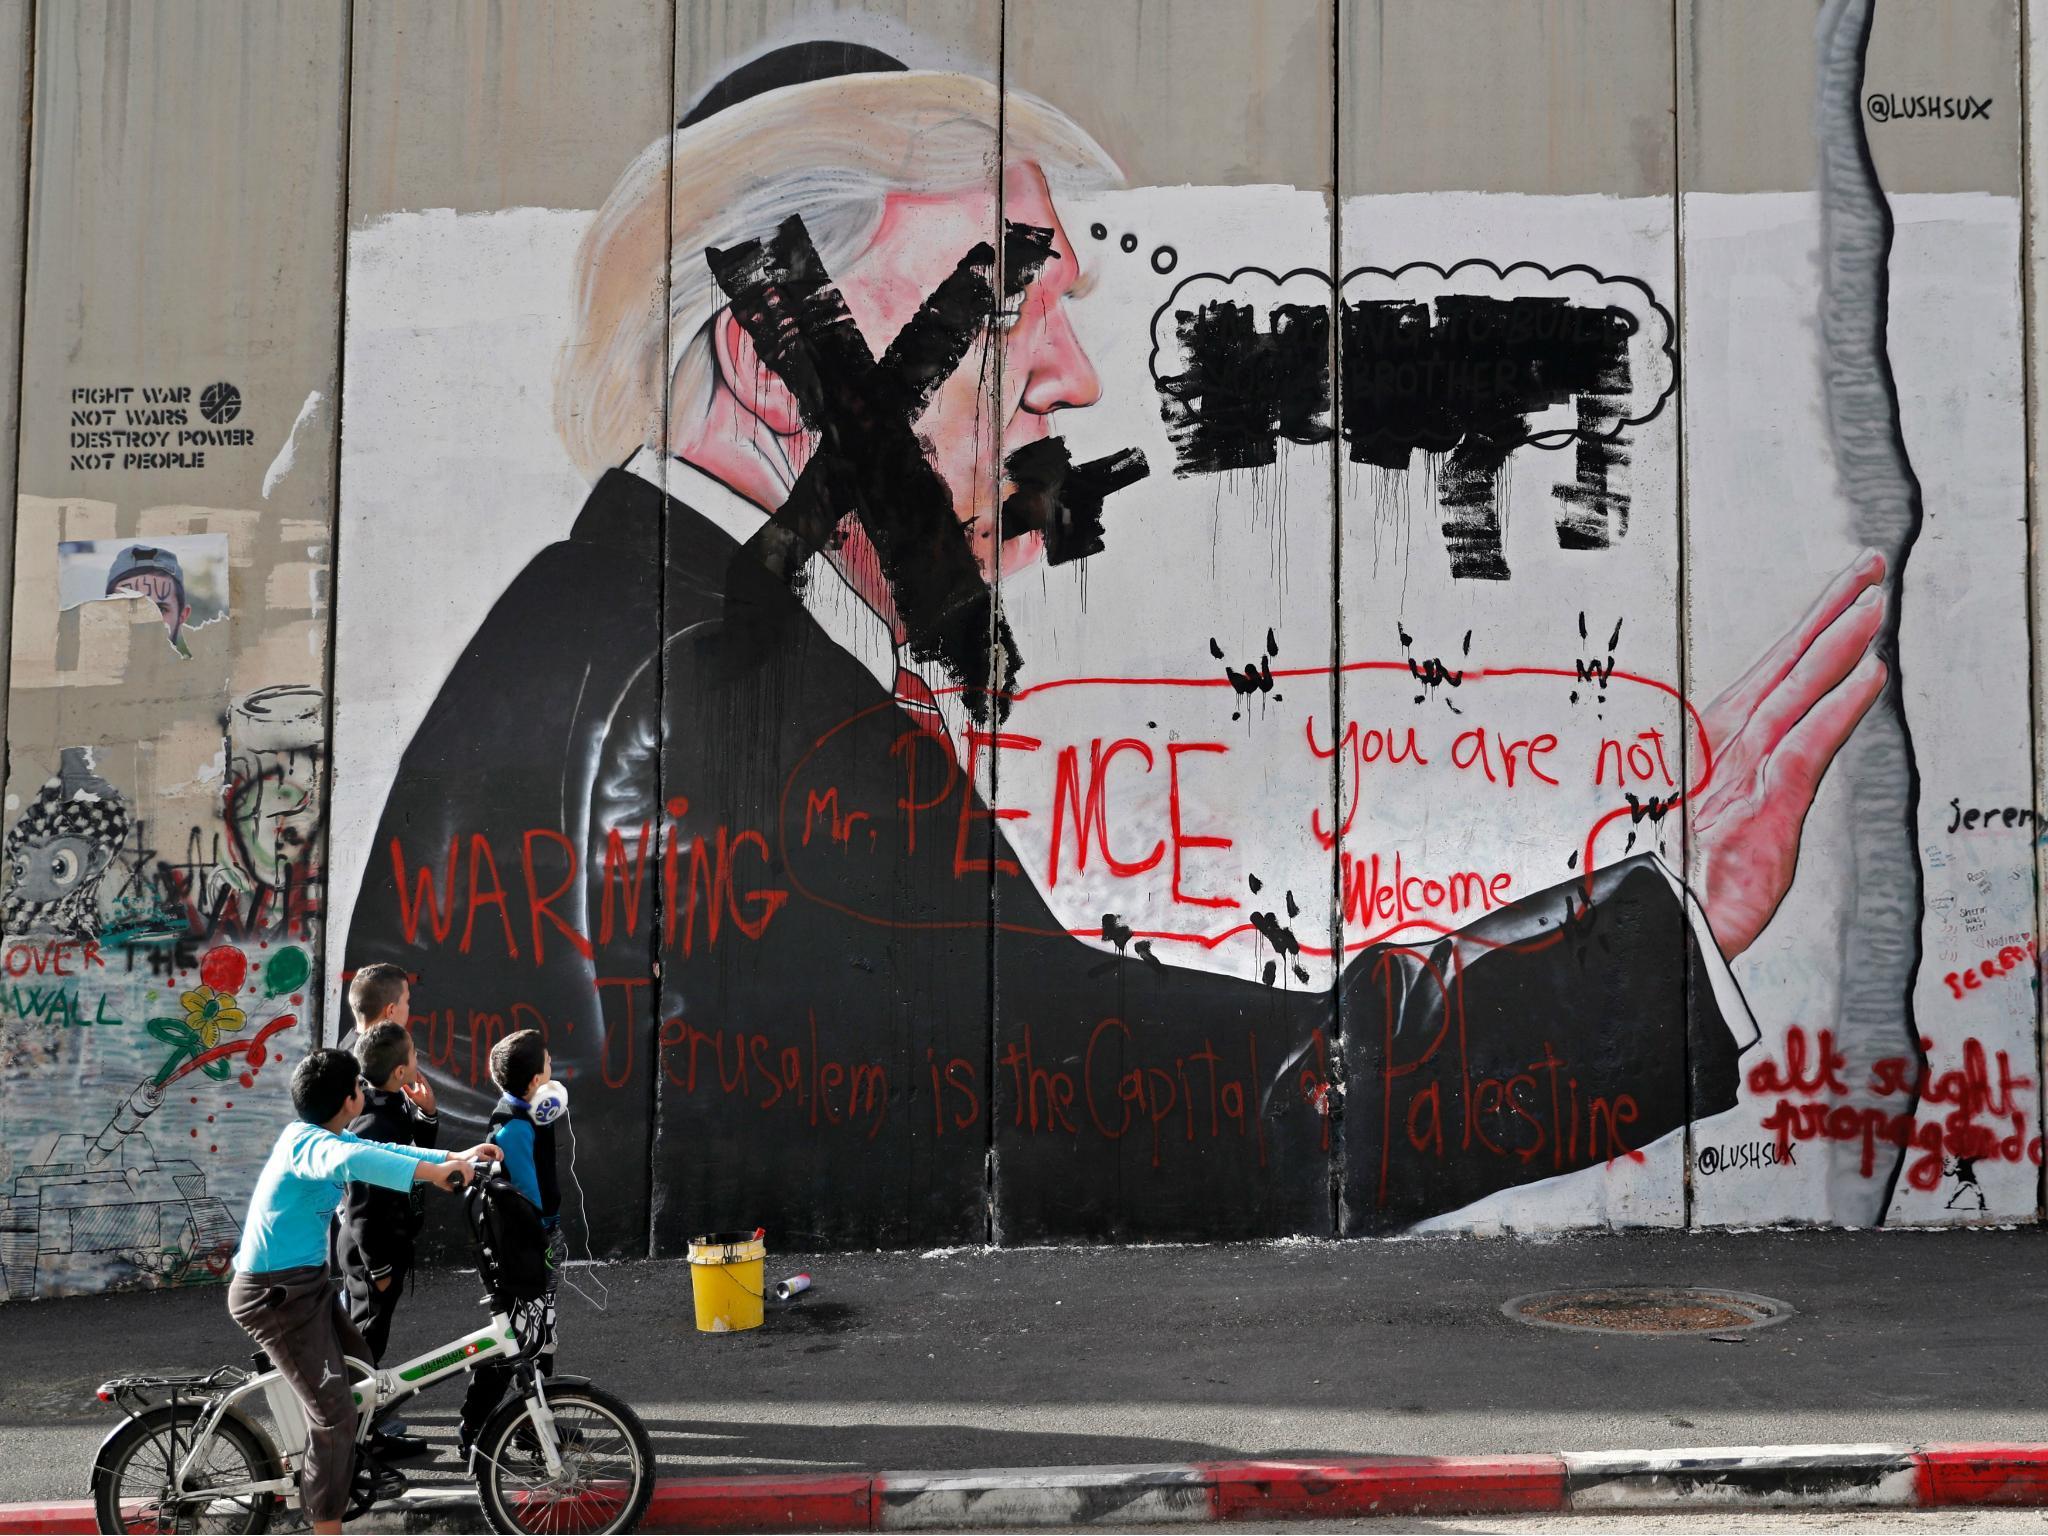 Palestinian children look at vandalised graffiti depicting US President Donald Trump and slogans against US Vice President Mike Pence painted on Israel's controversial separation barrier in the West Bank city of Bethlehem.